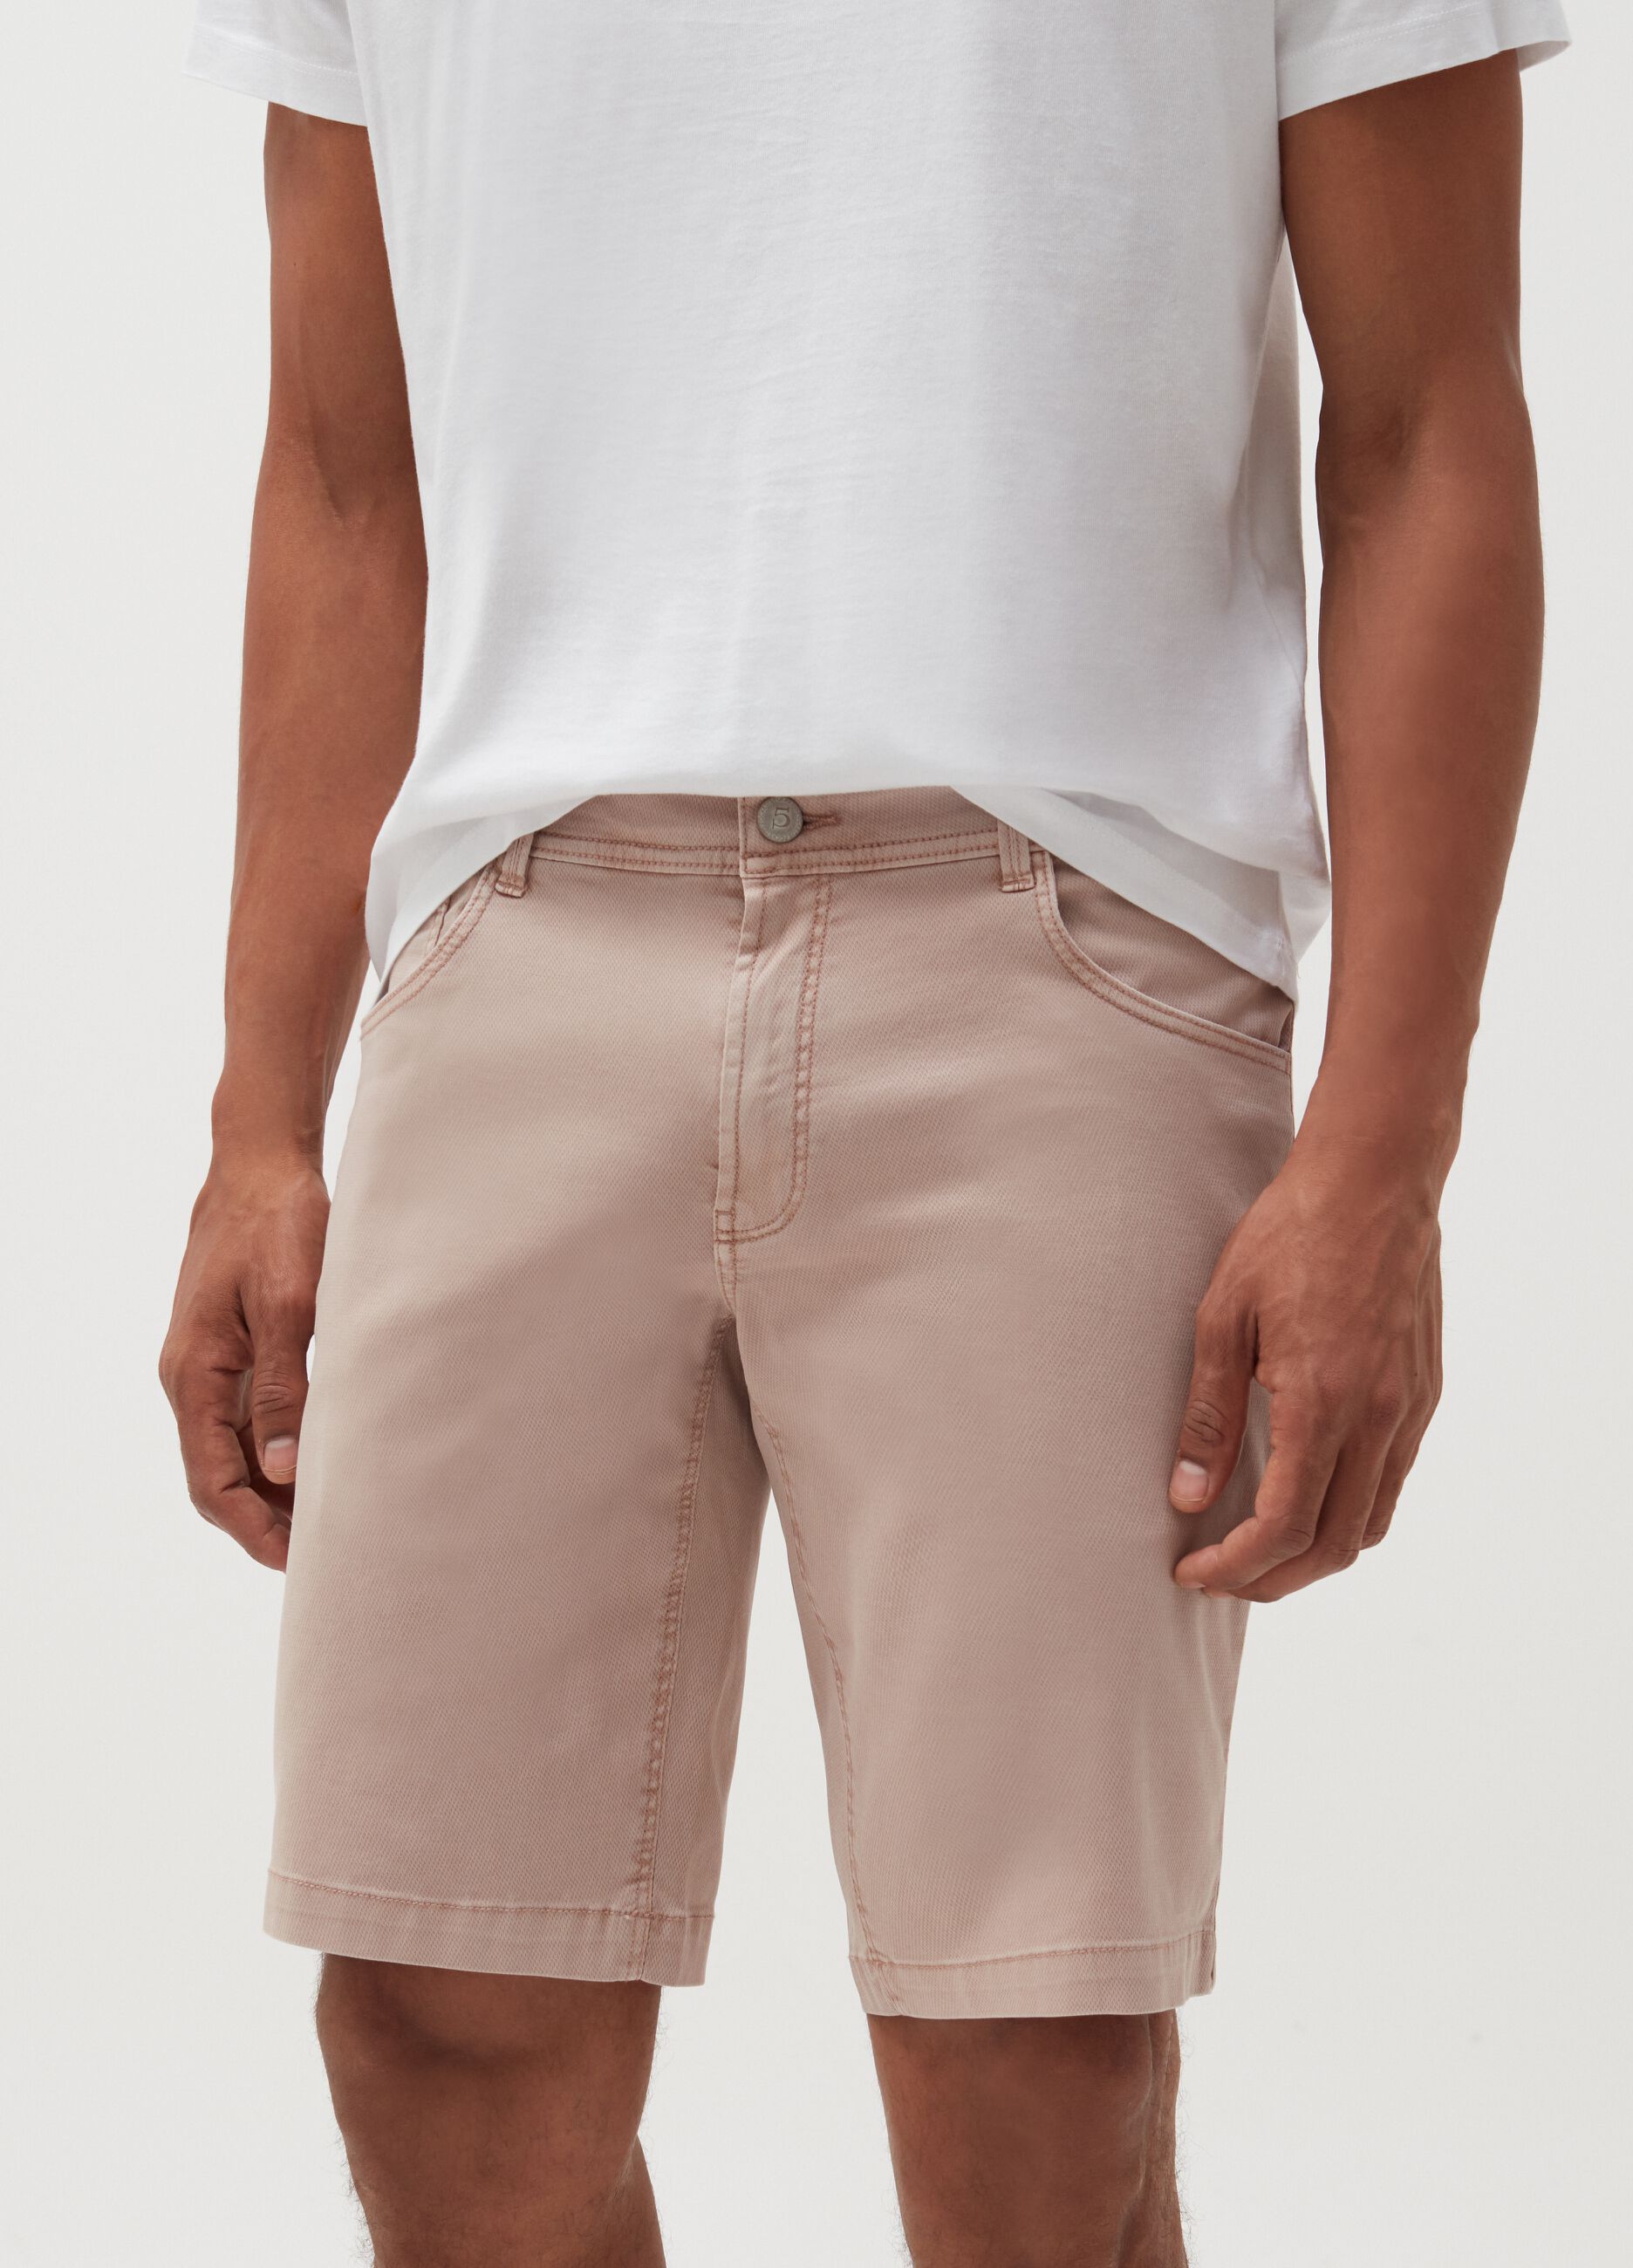 Five-pocket Bermuda shorts in charmeuse-weave cotton